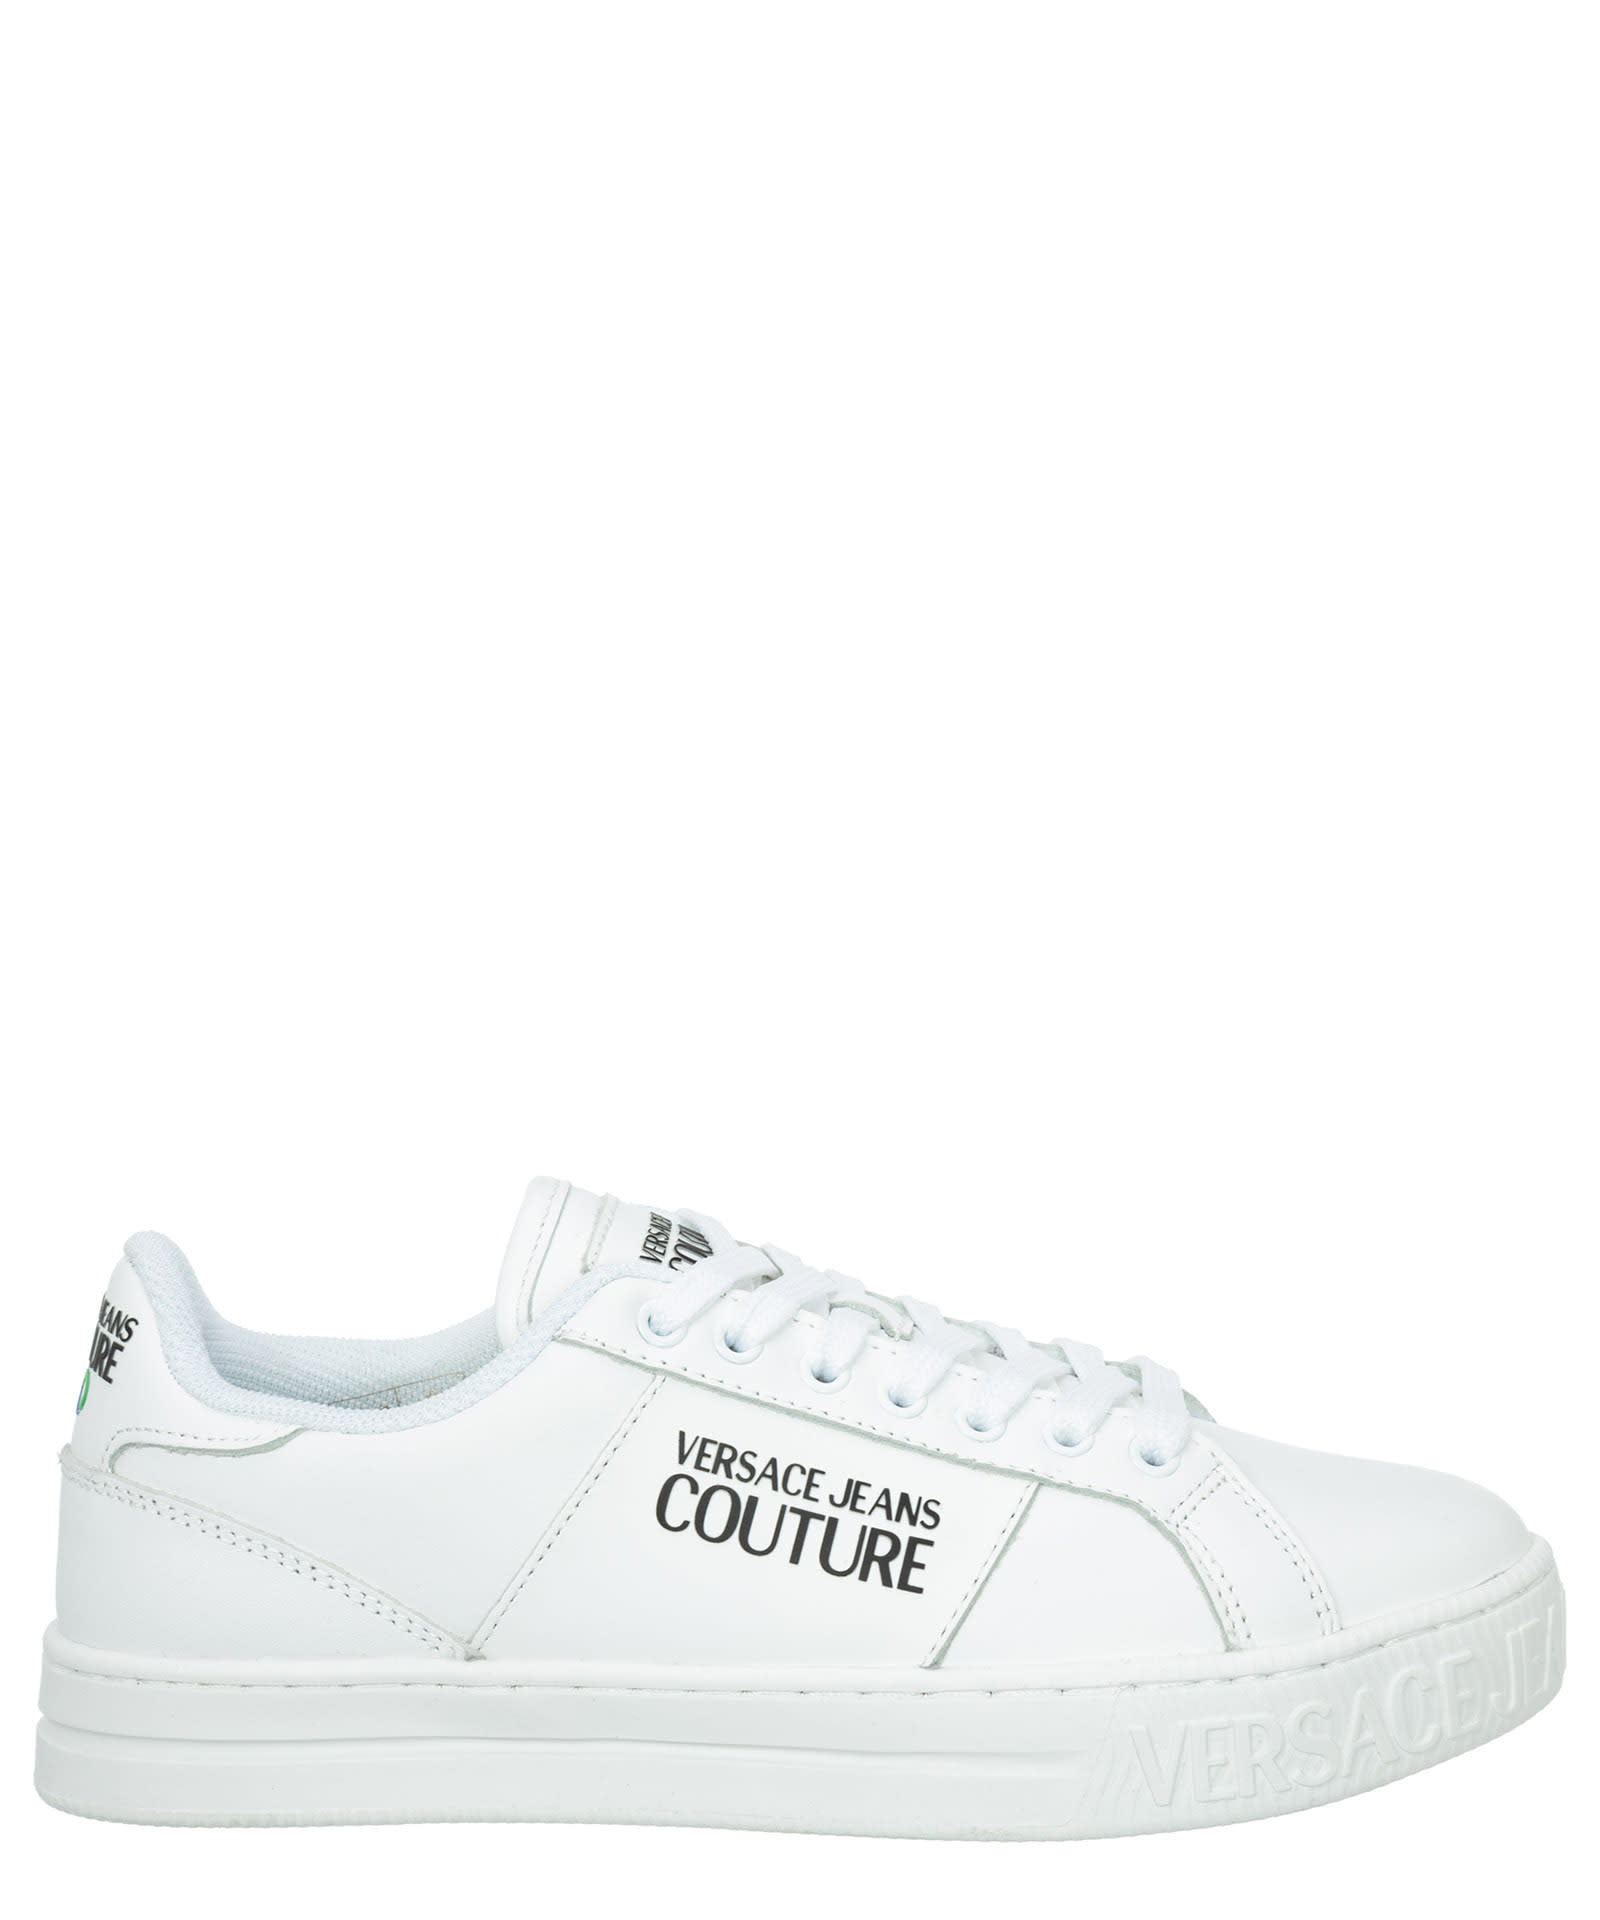 Versace Jeans Couture Court 88 Leather Sneakers